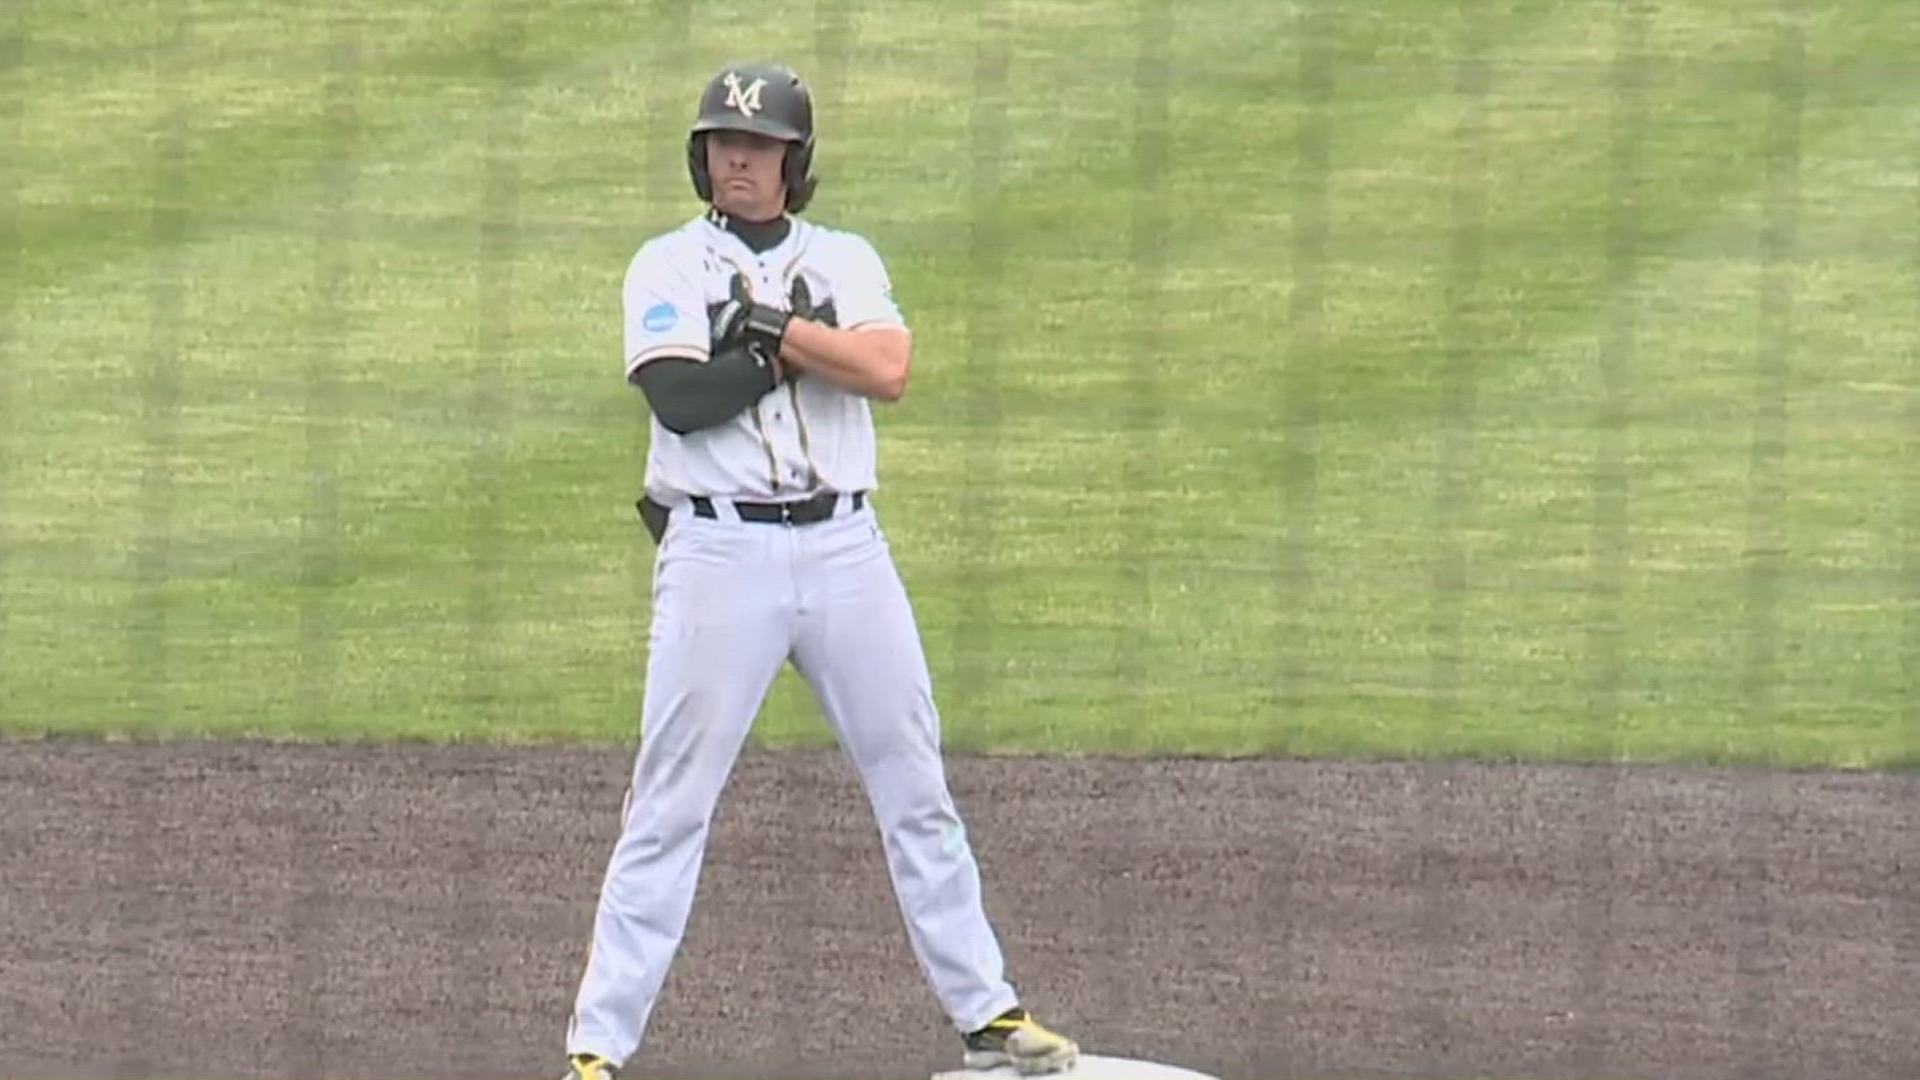 Millersville used a three-run eighth inning to lock up the win over their PSAC foe.